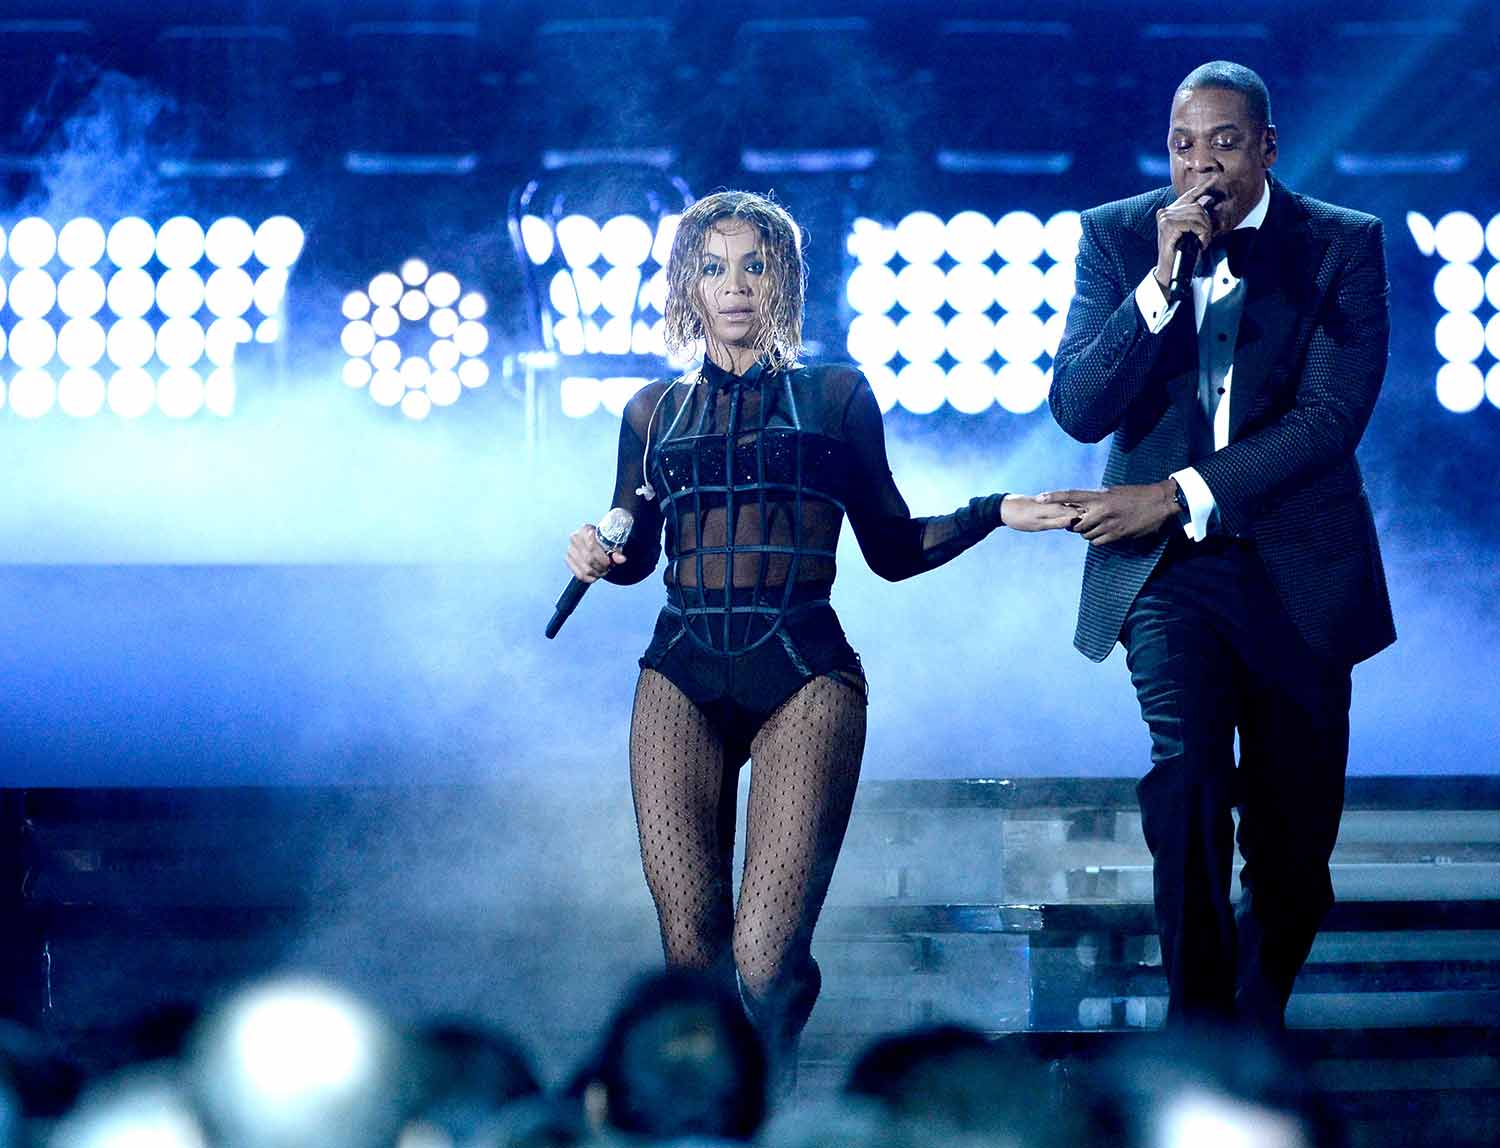 Beyoncé and Jay-Z's All-Time Steamiest Moments
